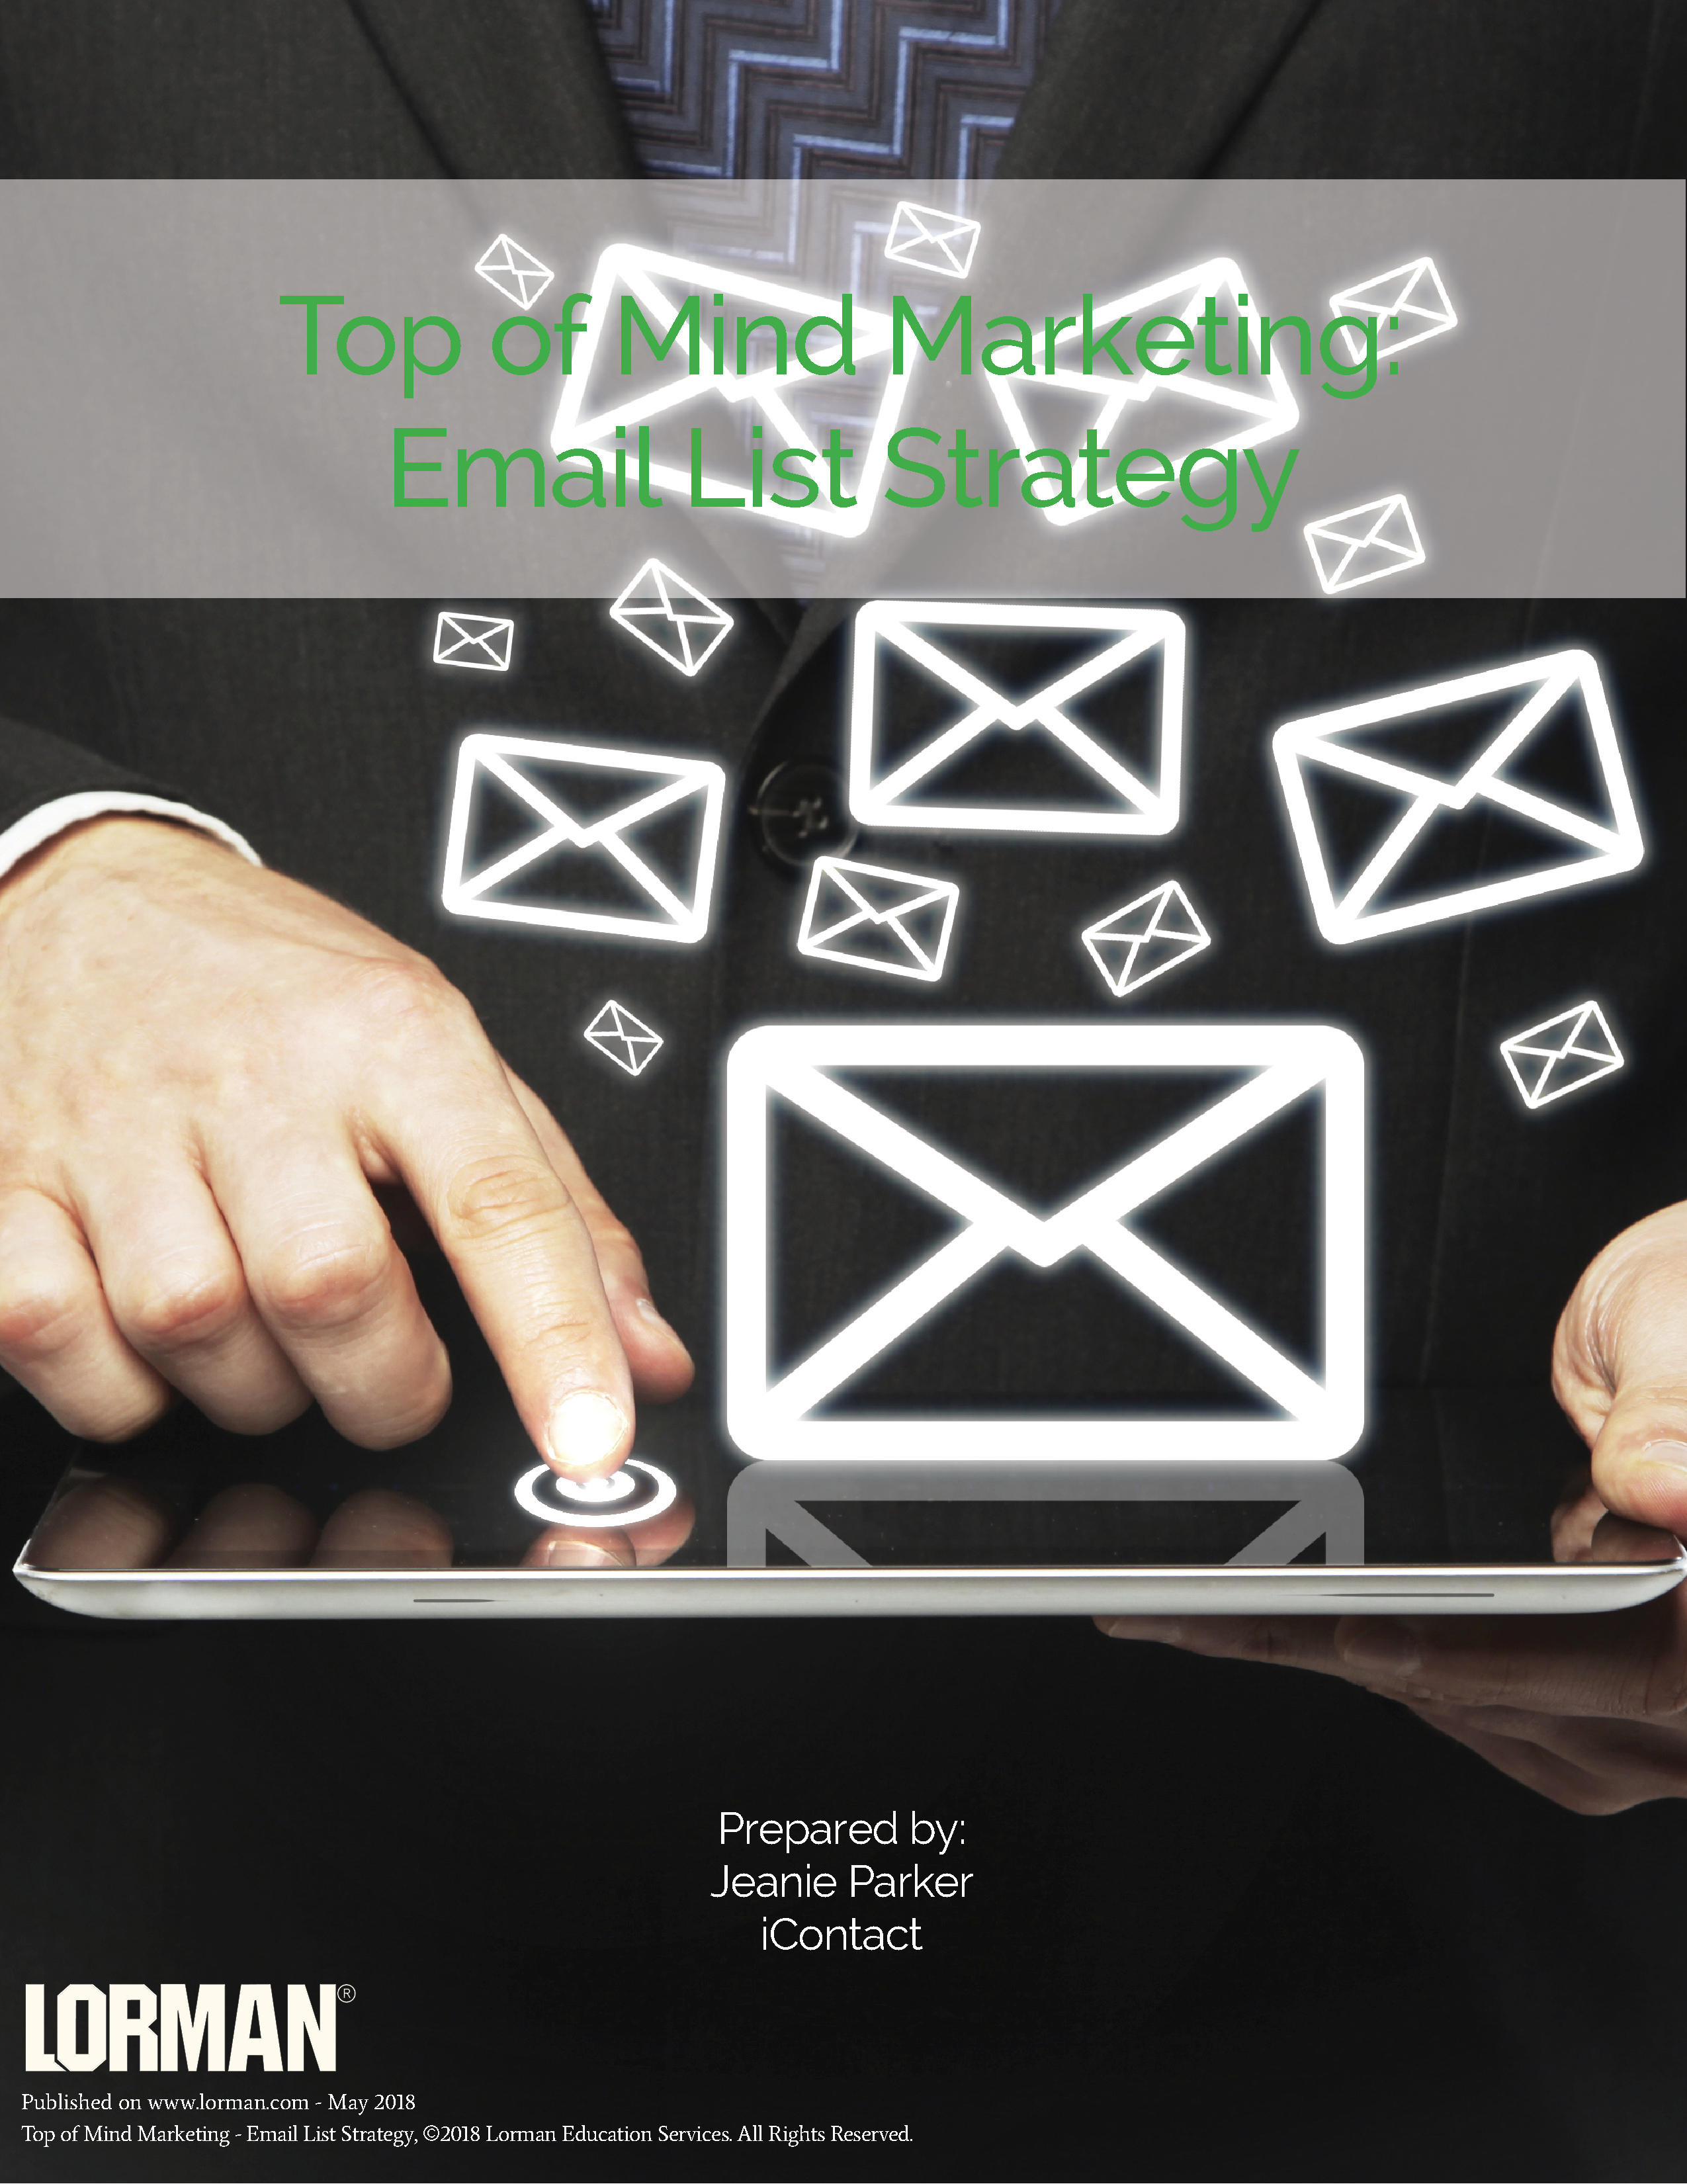 Top of Mind Marketing - Email List Strategy